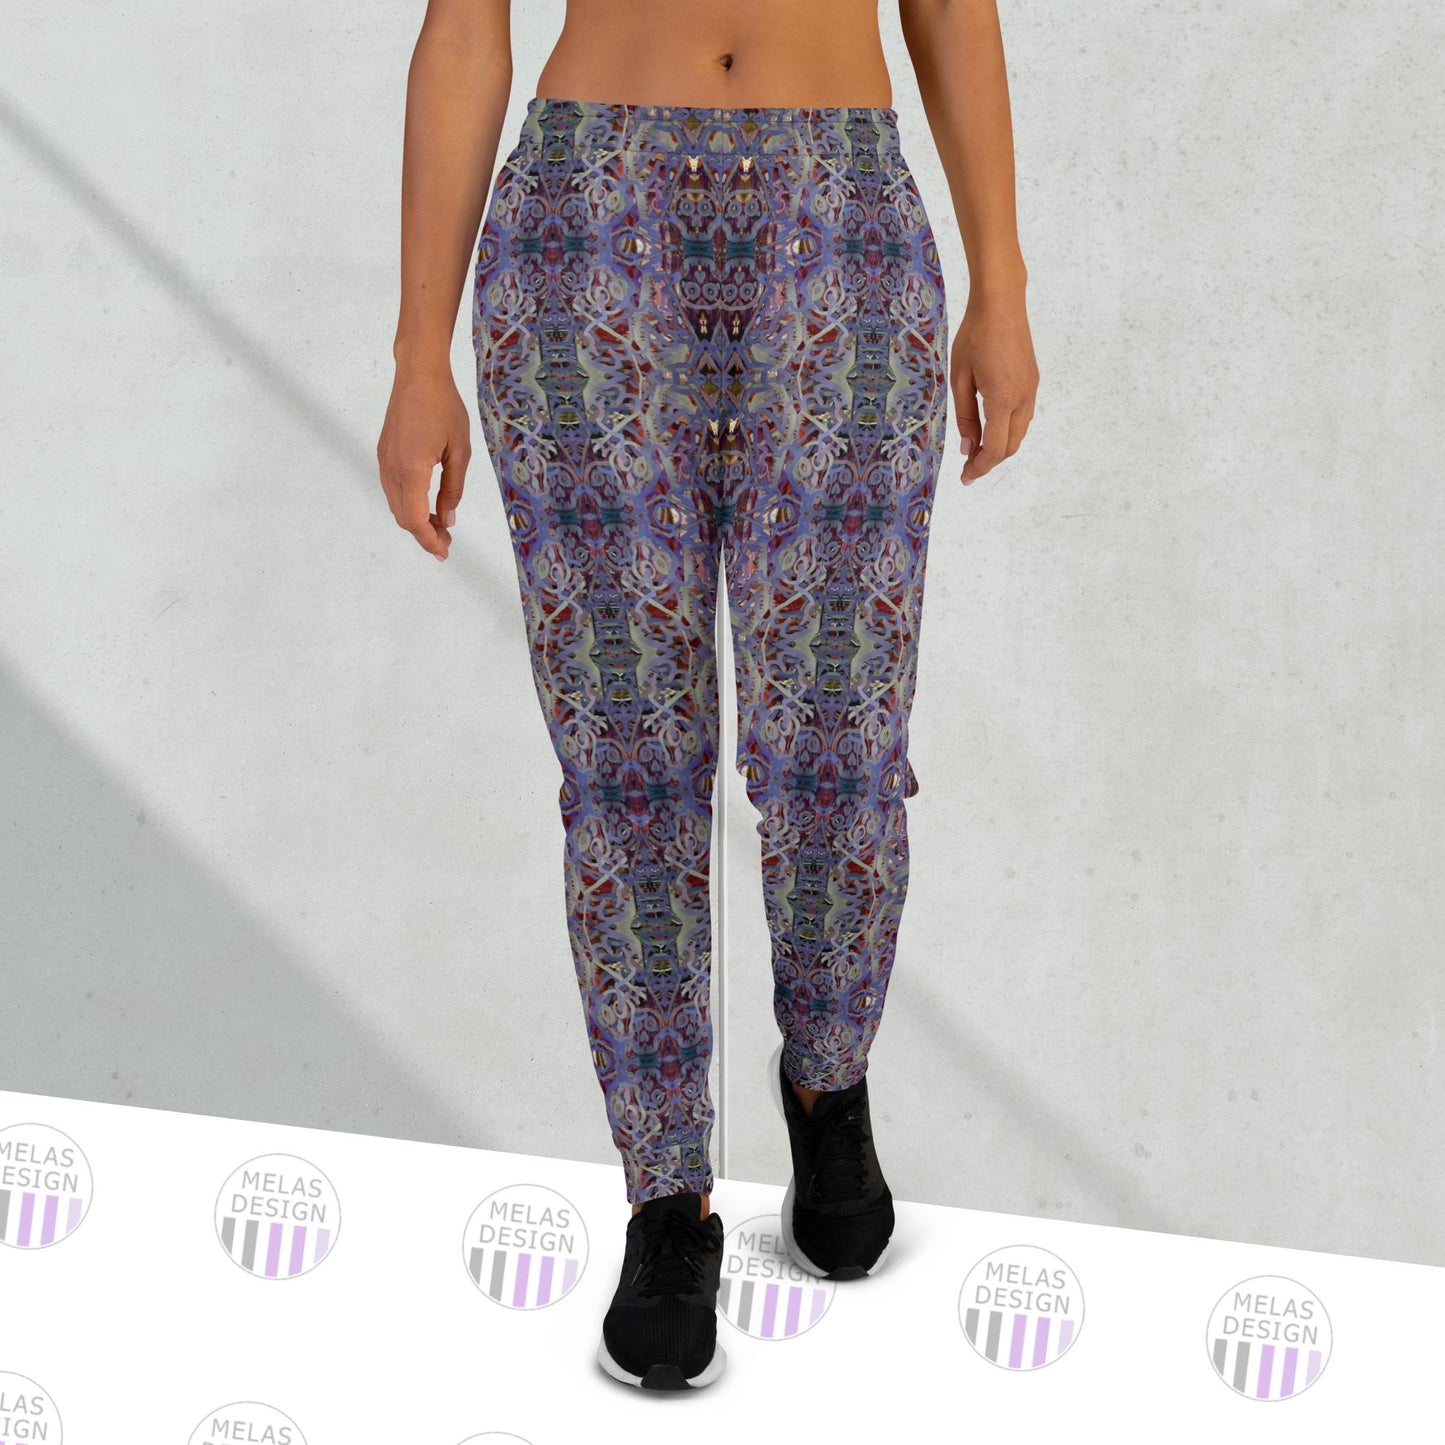 Voodoo Skull Coffin Pattern Women's Joggers; gothic; alternative; witchy; sweatpants; casual; Melasdesign; S-3X; 